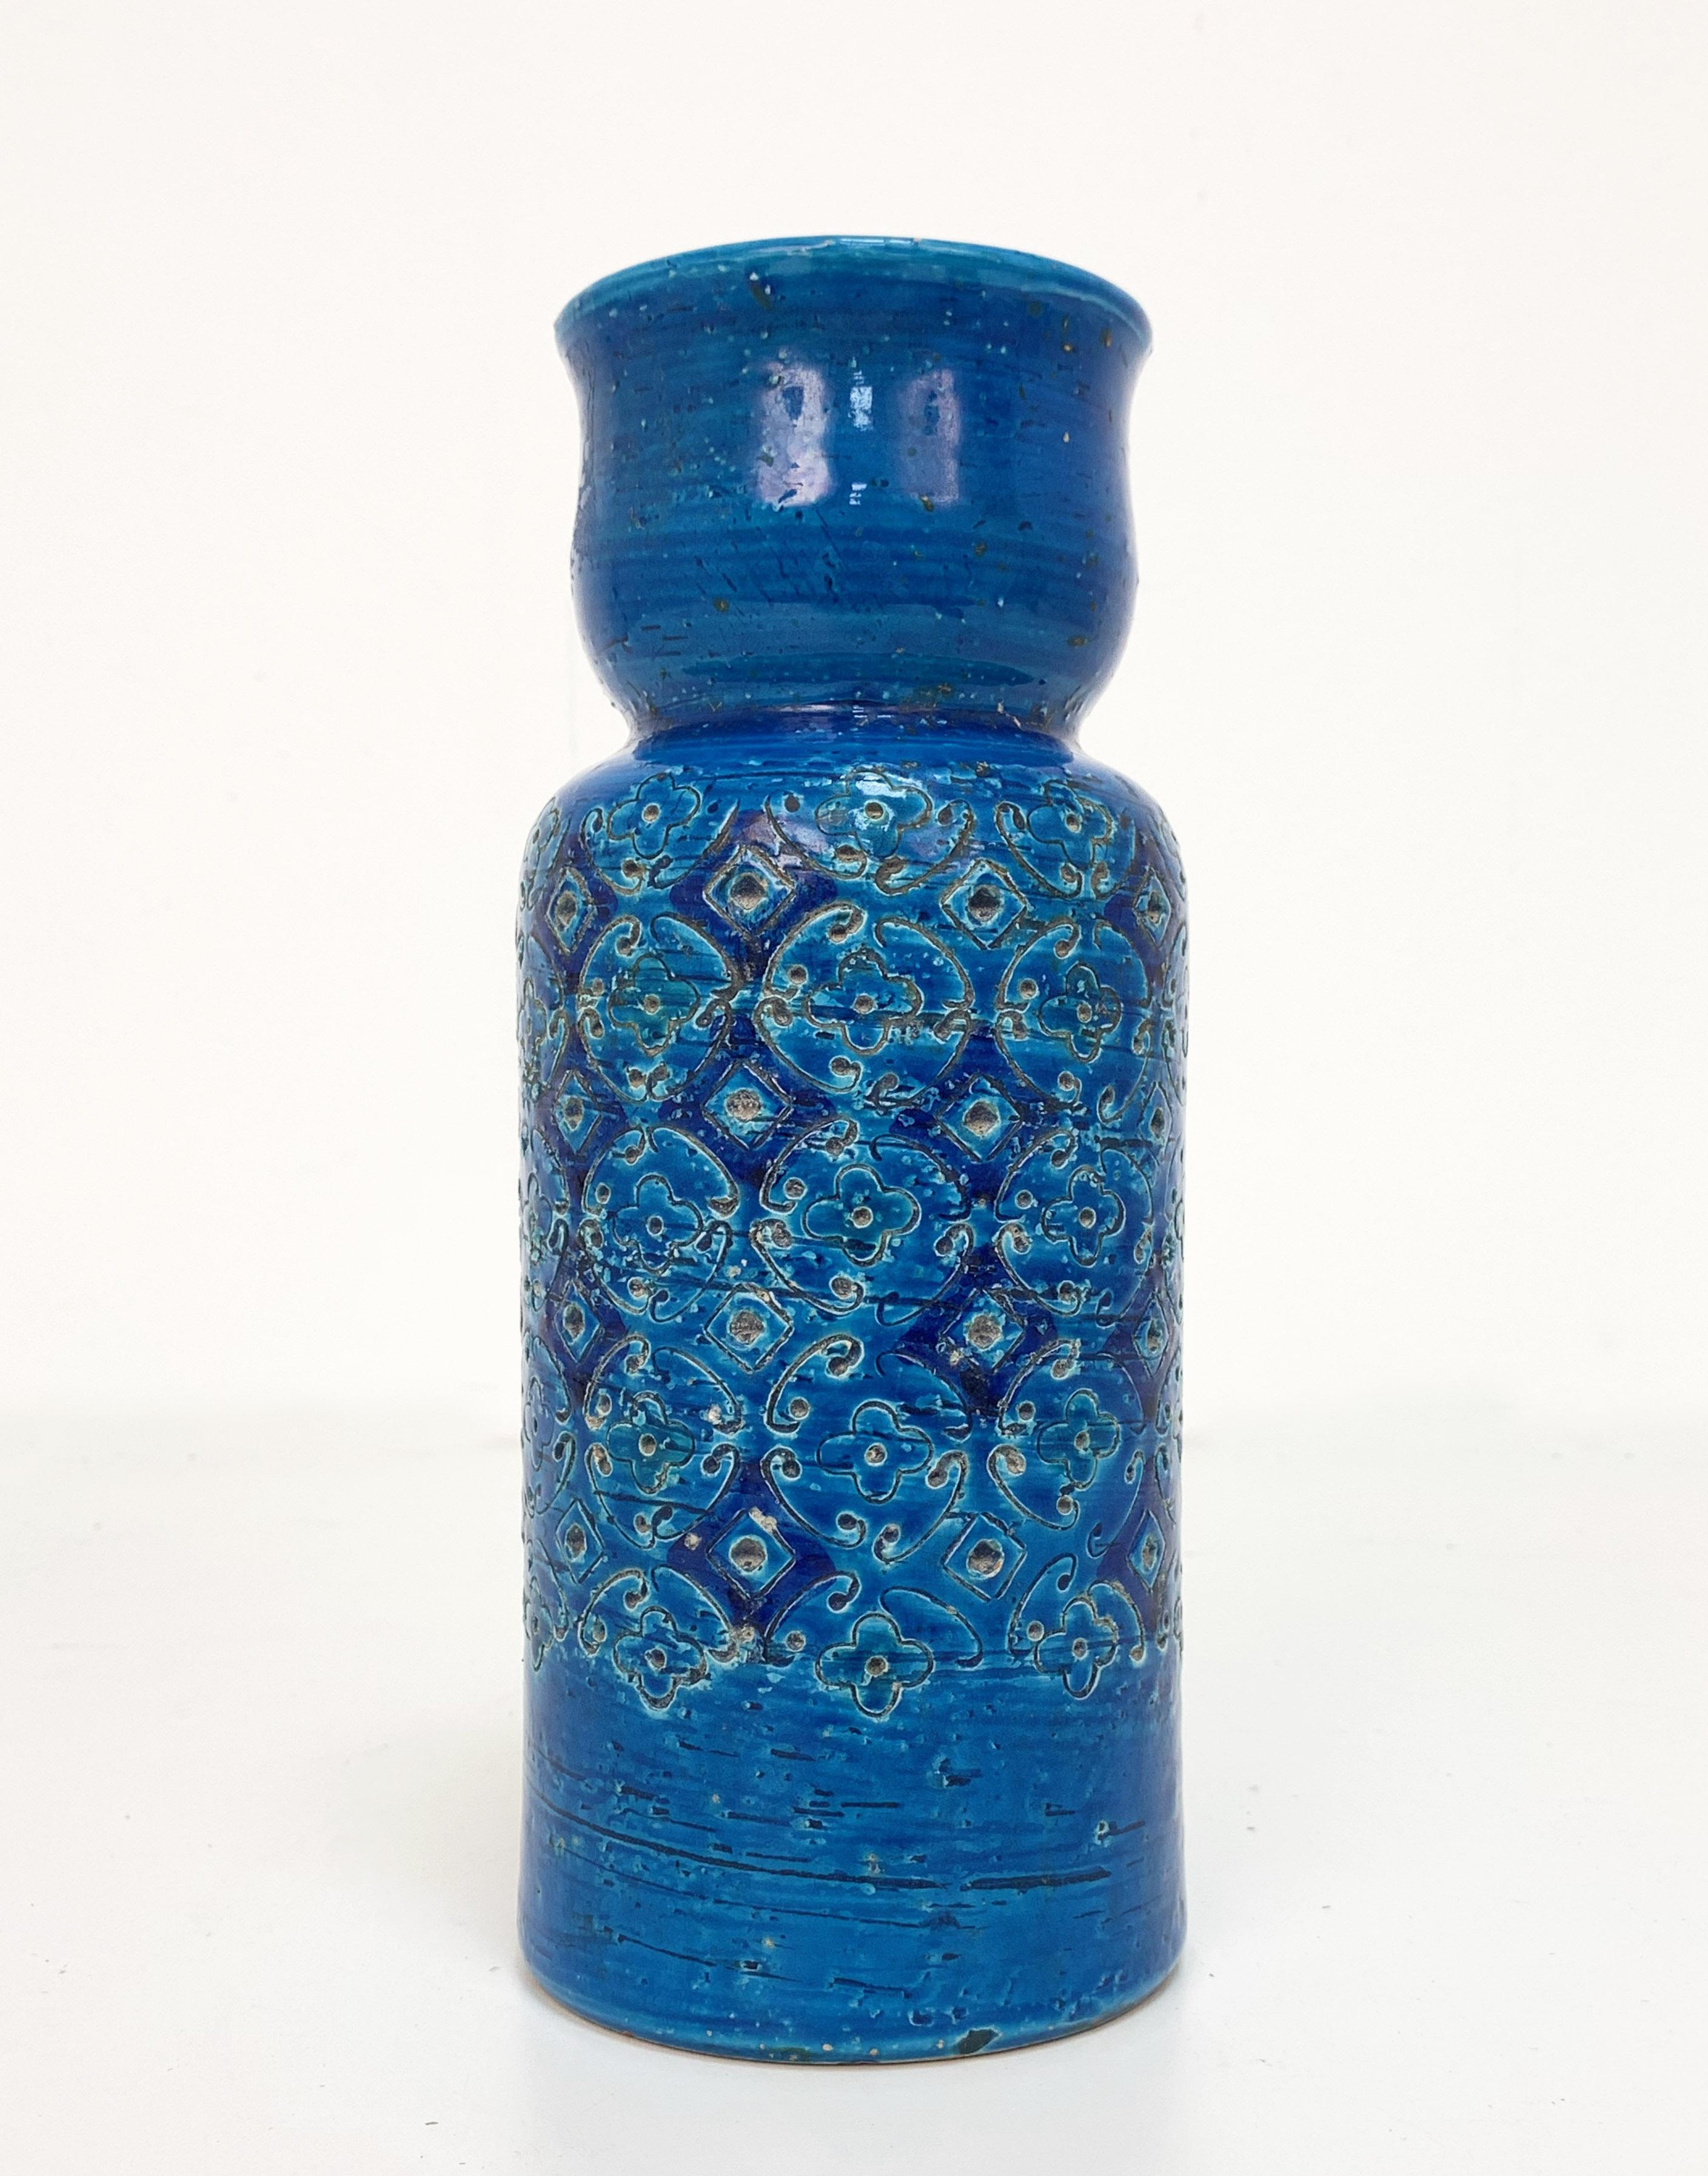 Vase Rimini blue, blue glazed terracotta ceramic design by Aldo Londi and manufactured by Bitossi. Handcrafted in Italy with hand-carved geometric design and in a glazed vibrant turquoise and cobalt blue, Italy, 1950s-1960s.